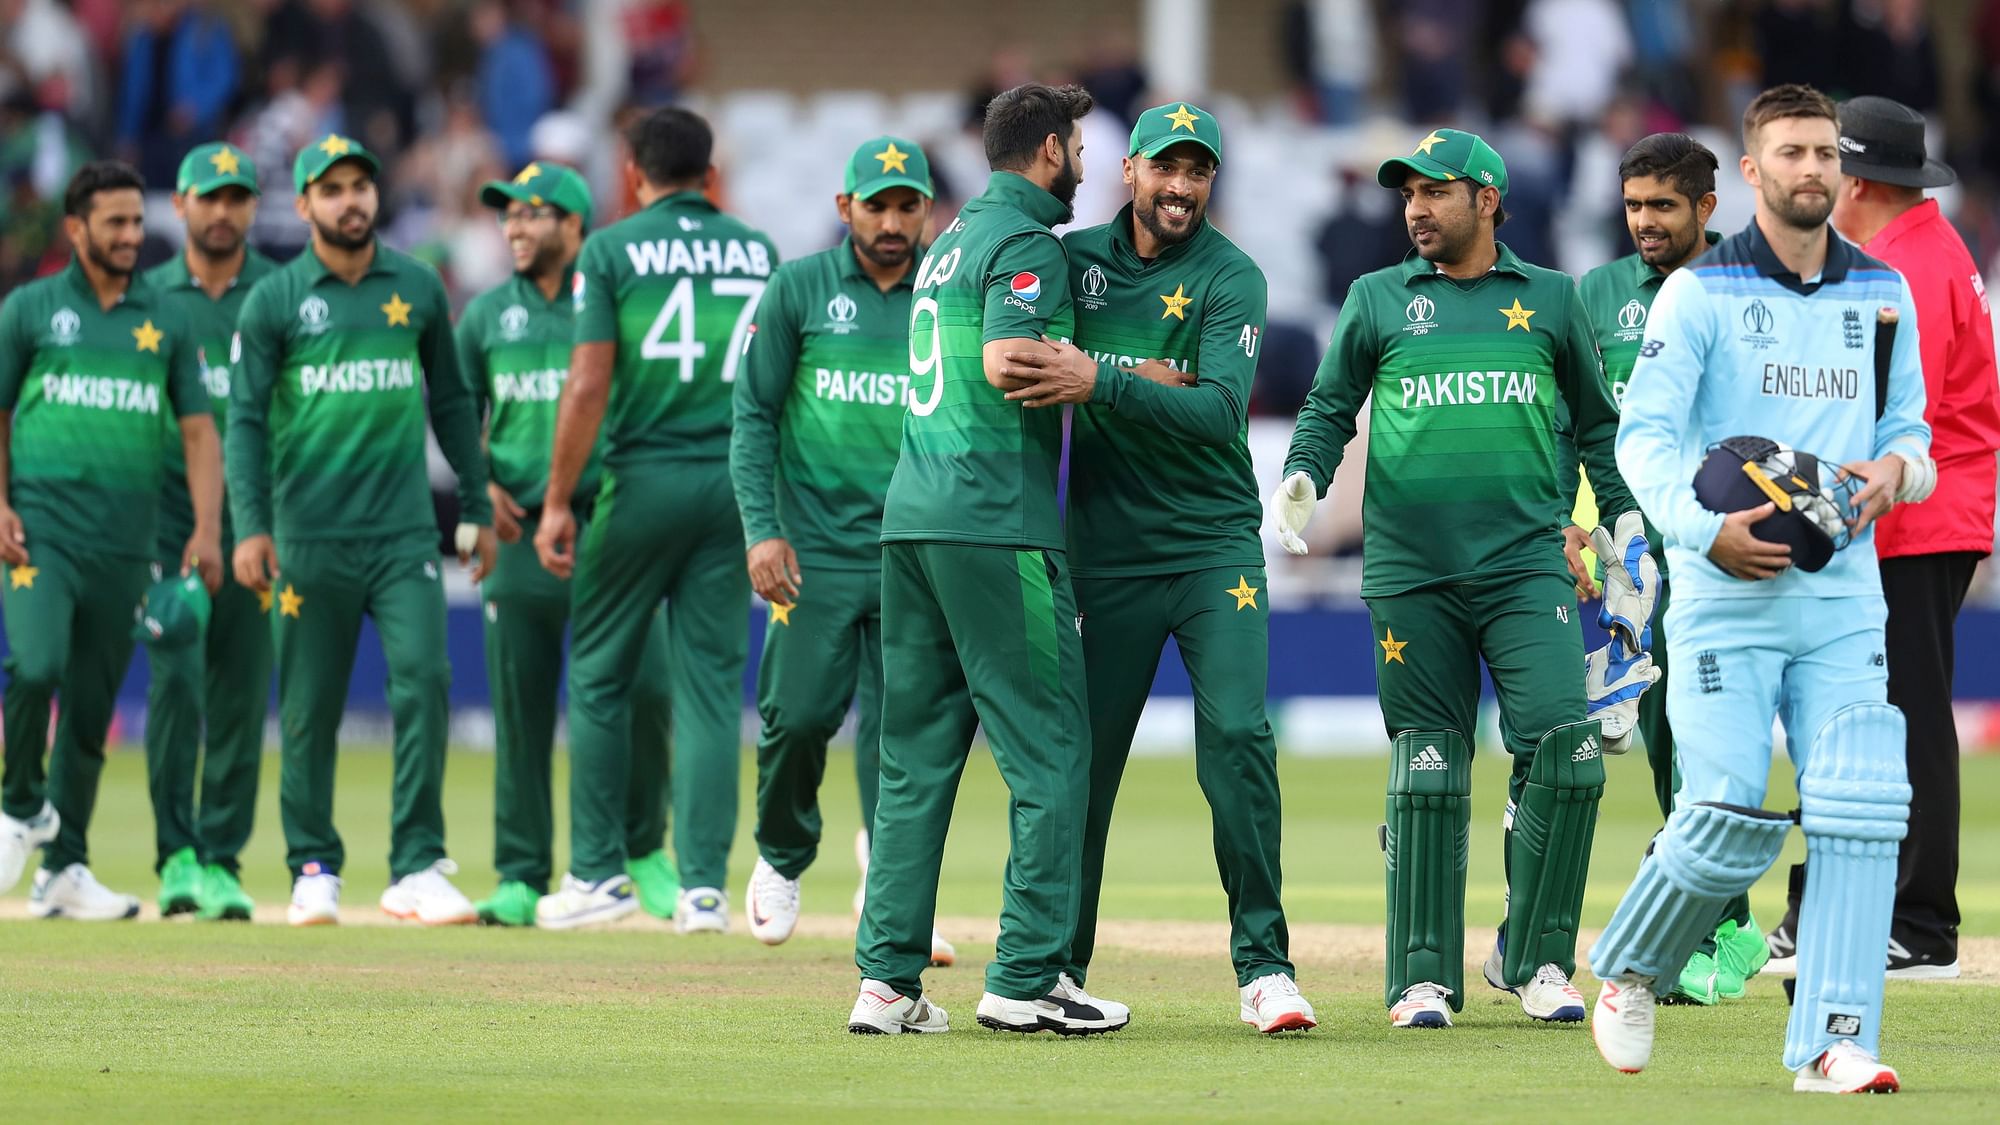 Icc World Cup 2019 Pakistan End 12 Match Losing Streak With Impressive